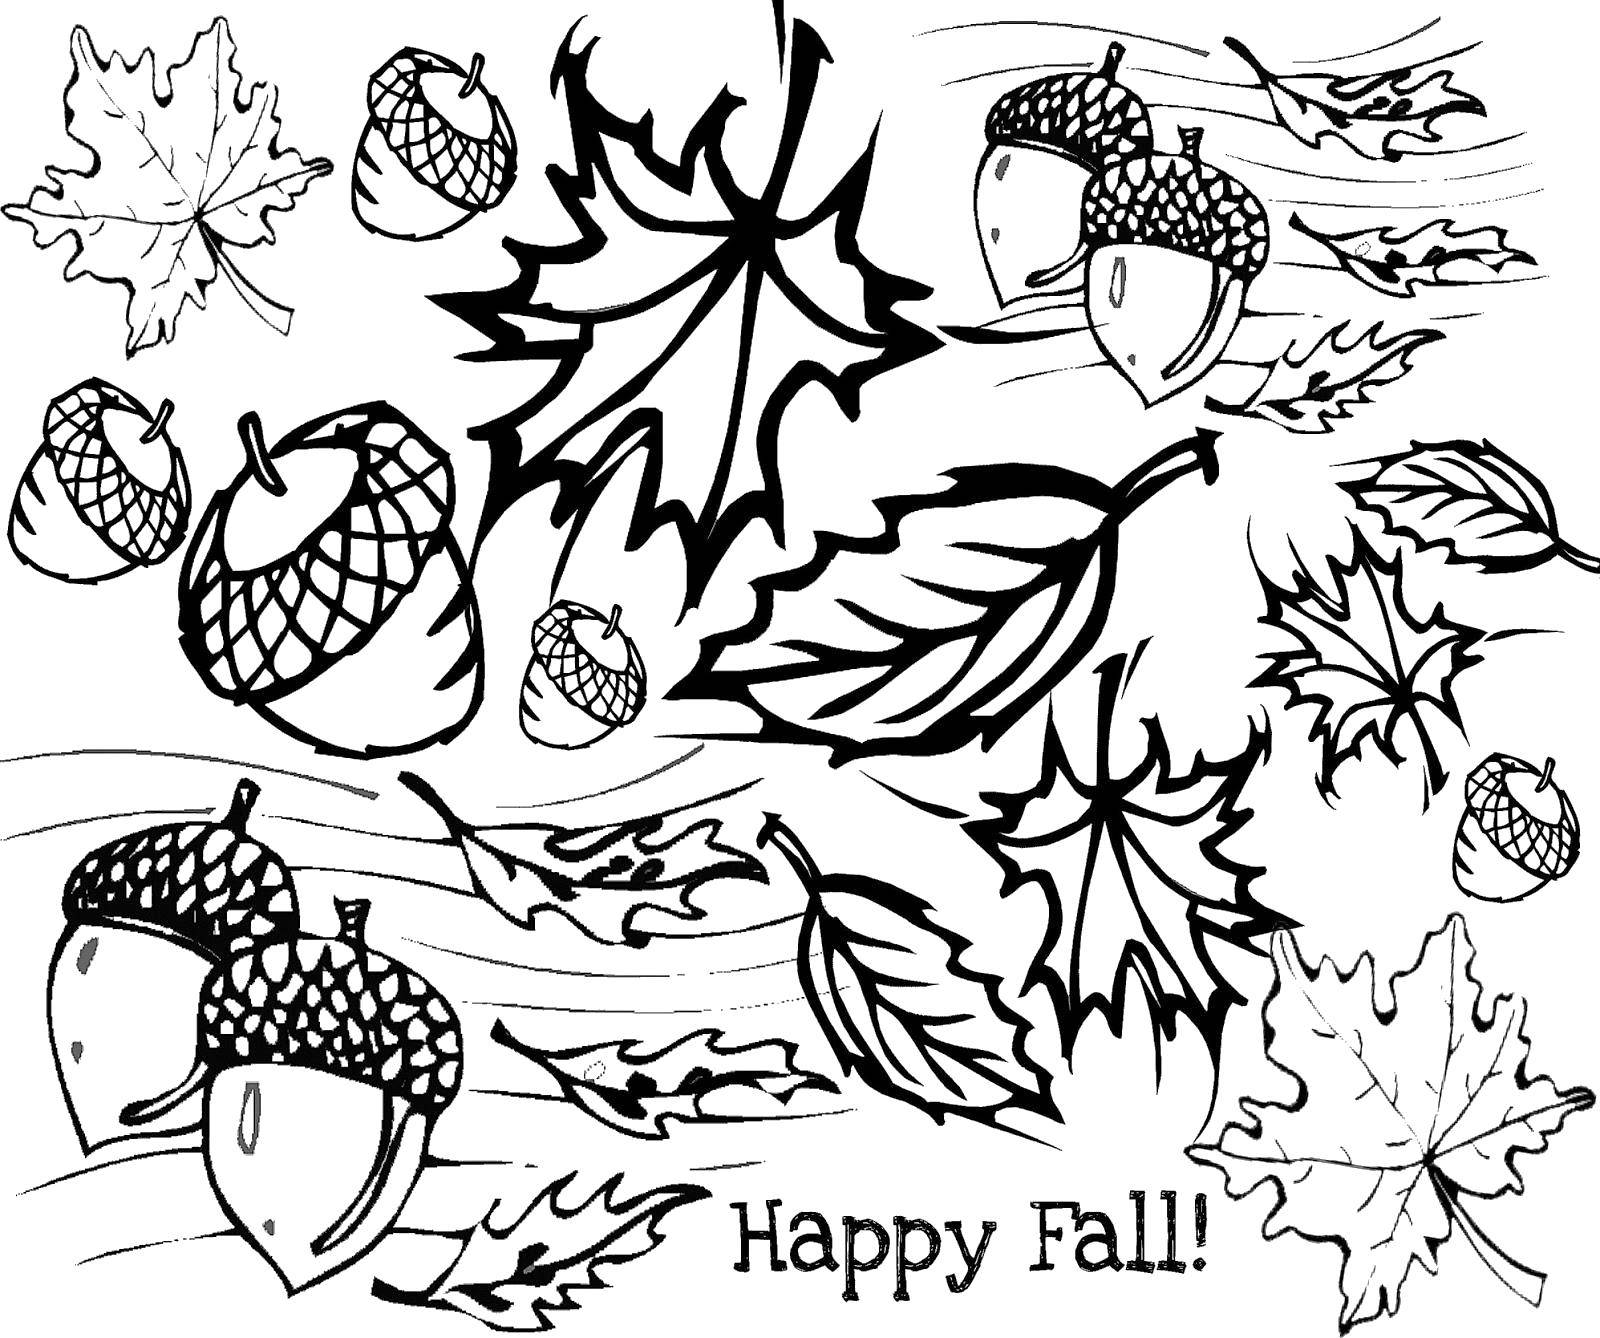 Coloring Happy falling leaves. Category Autumn. Tags:  Autumn, leaves.